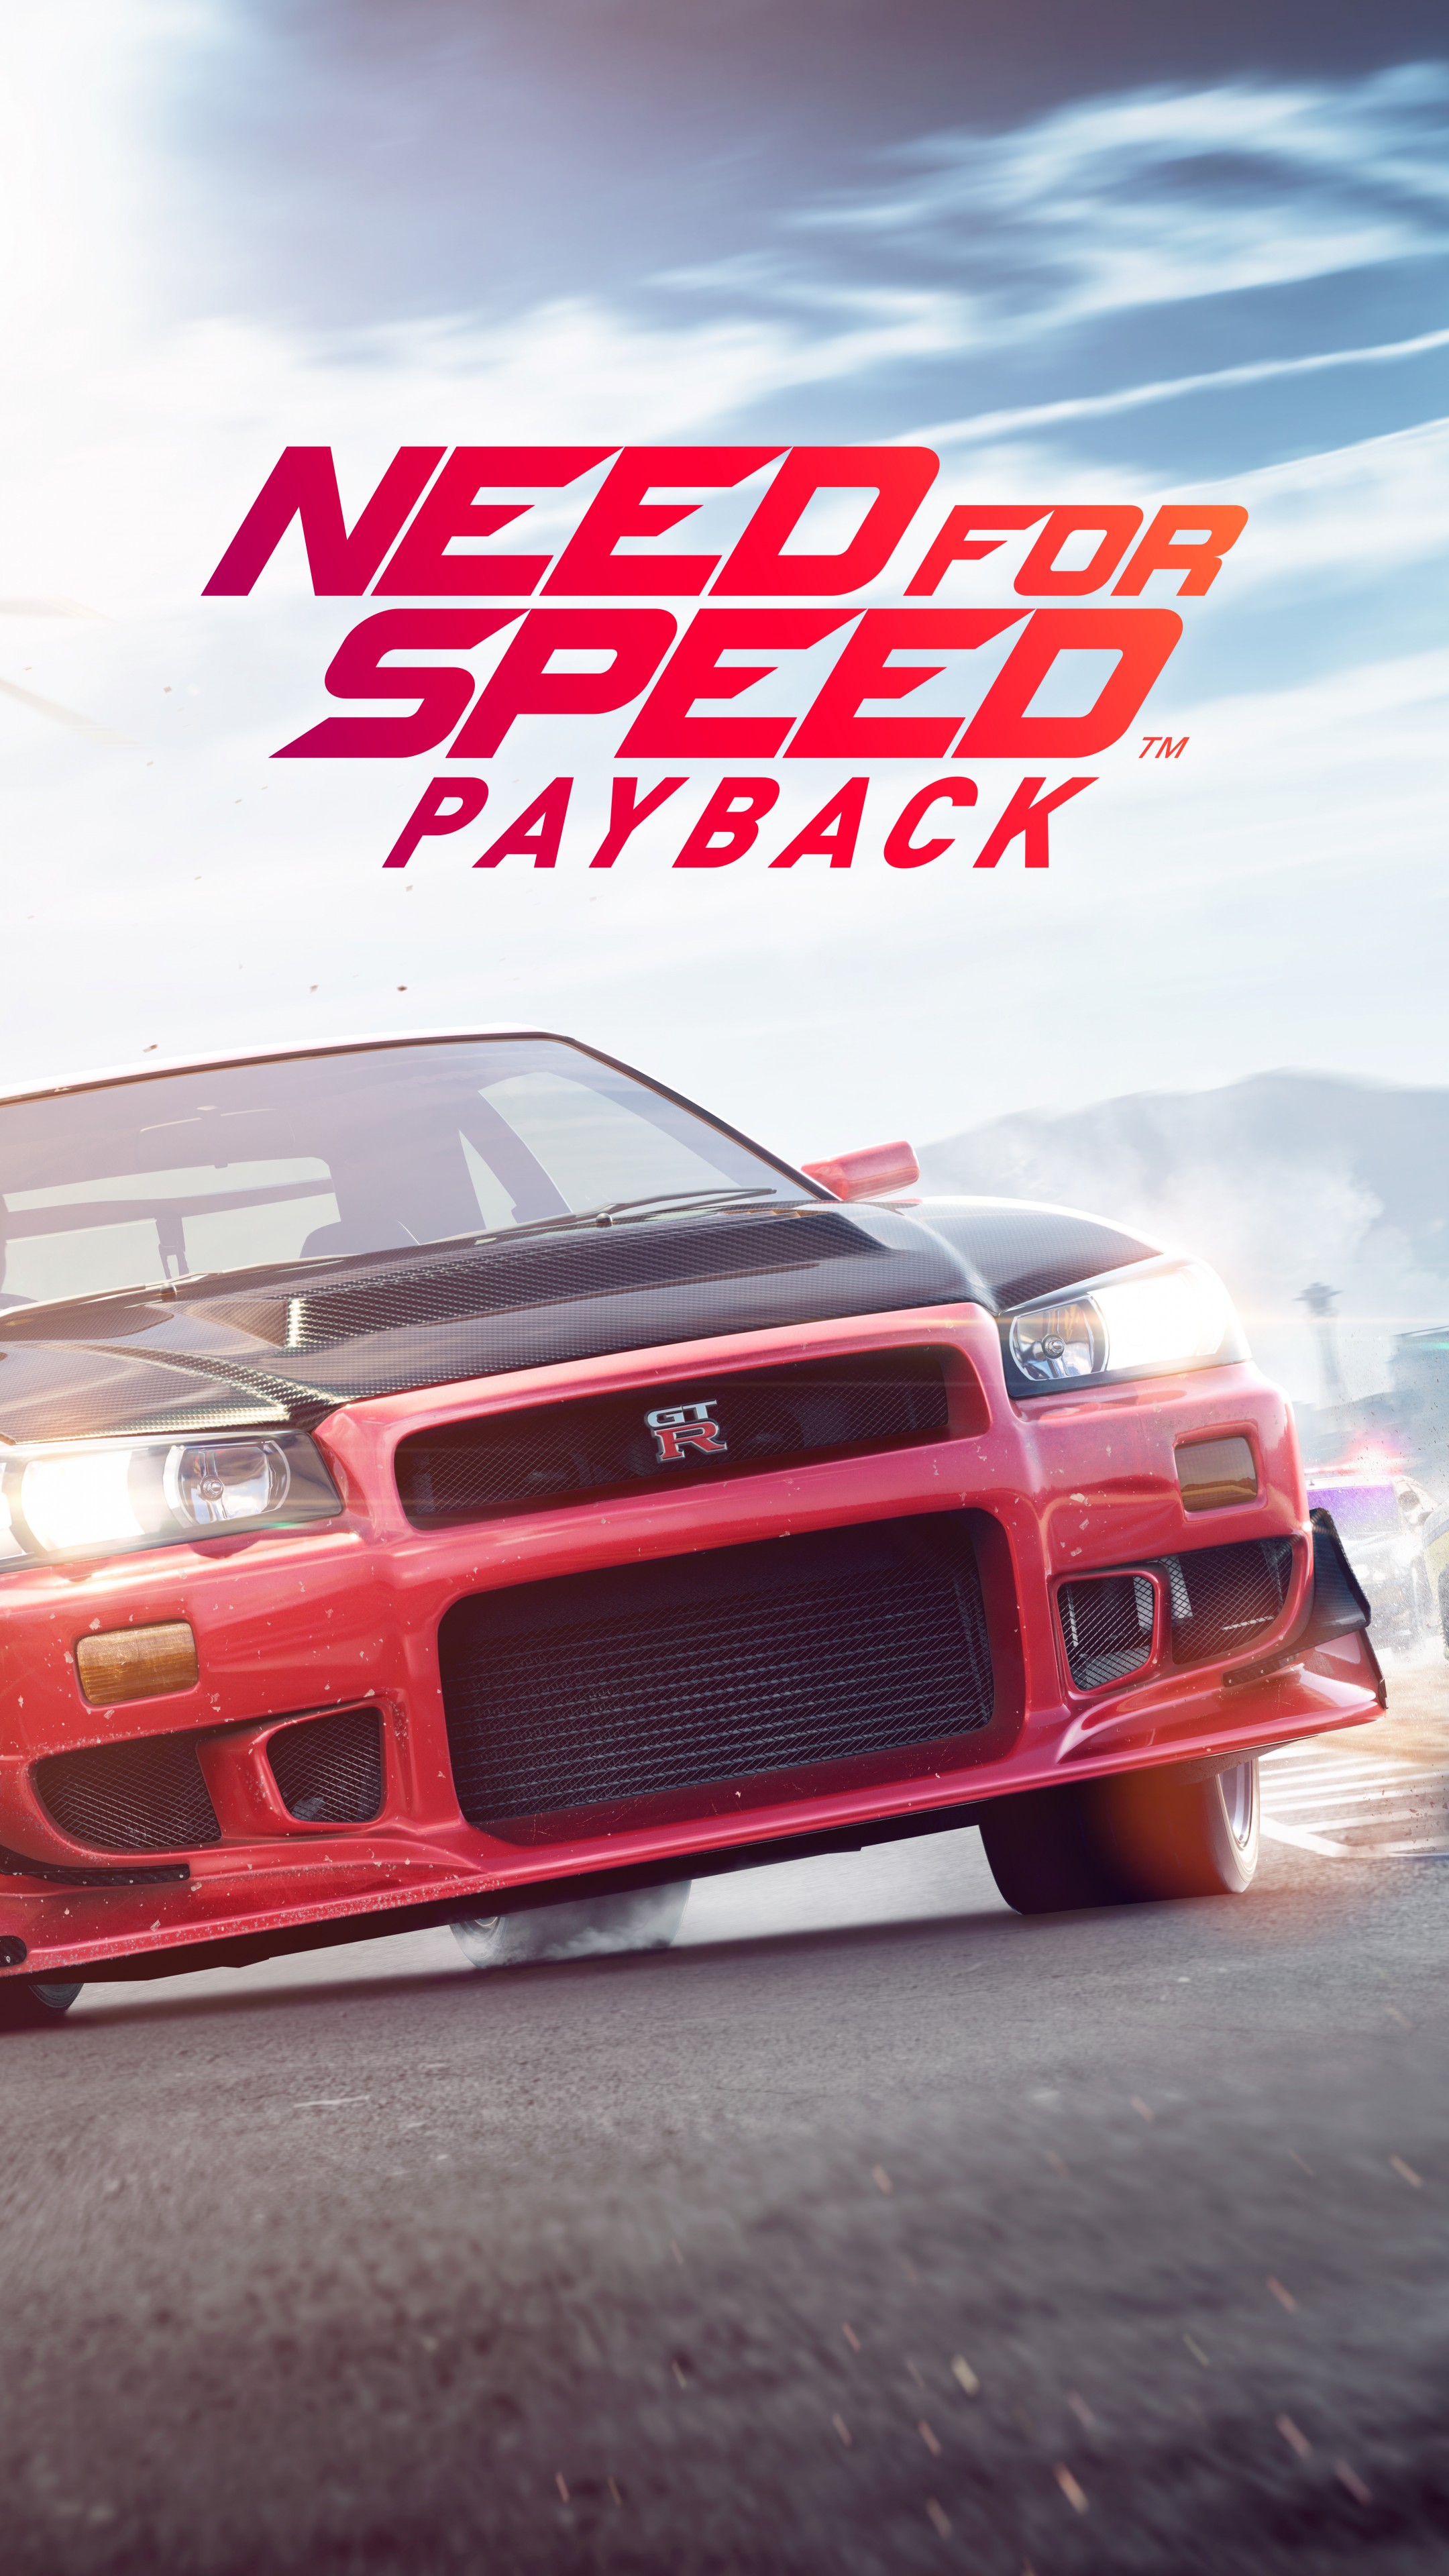 Wallpaper Need for Speed Playback, 4k, poster, E3 2017, Games #13790